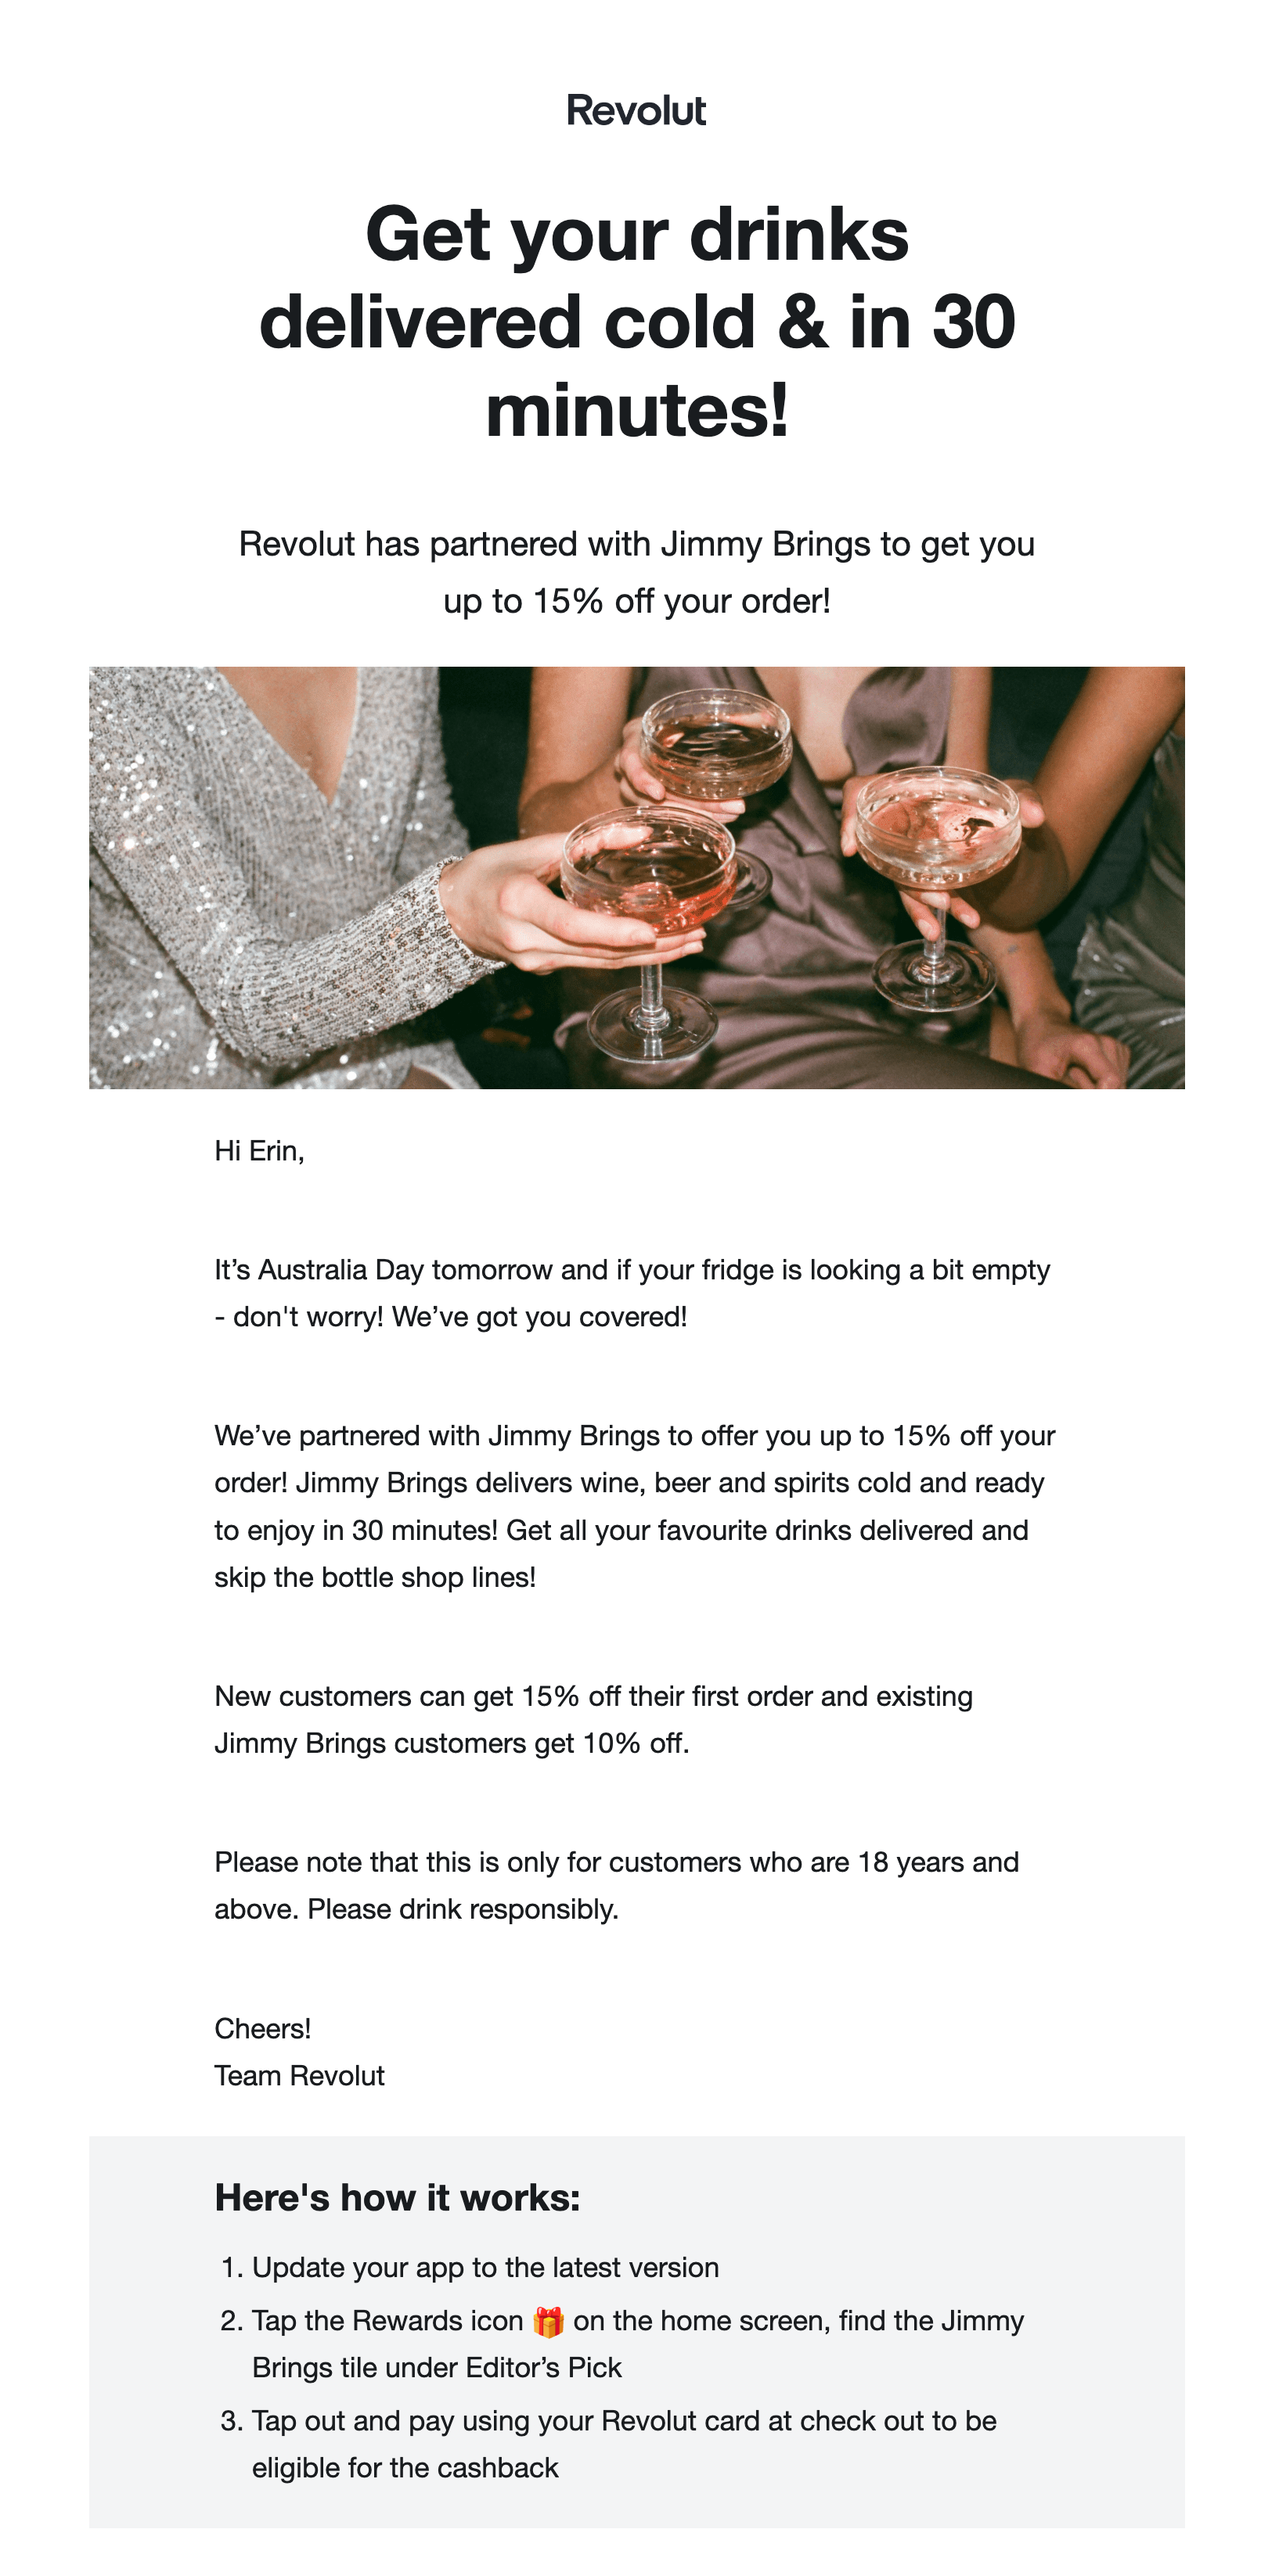 Australia Day-themed newsletter with a partnership discount